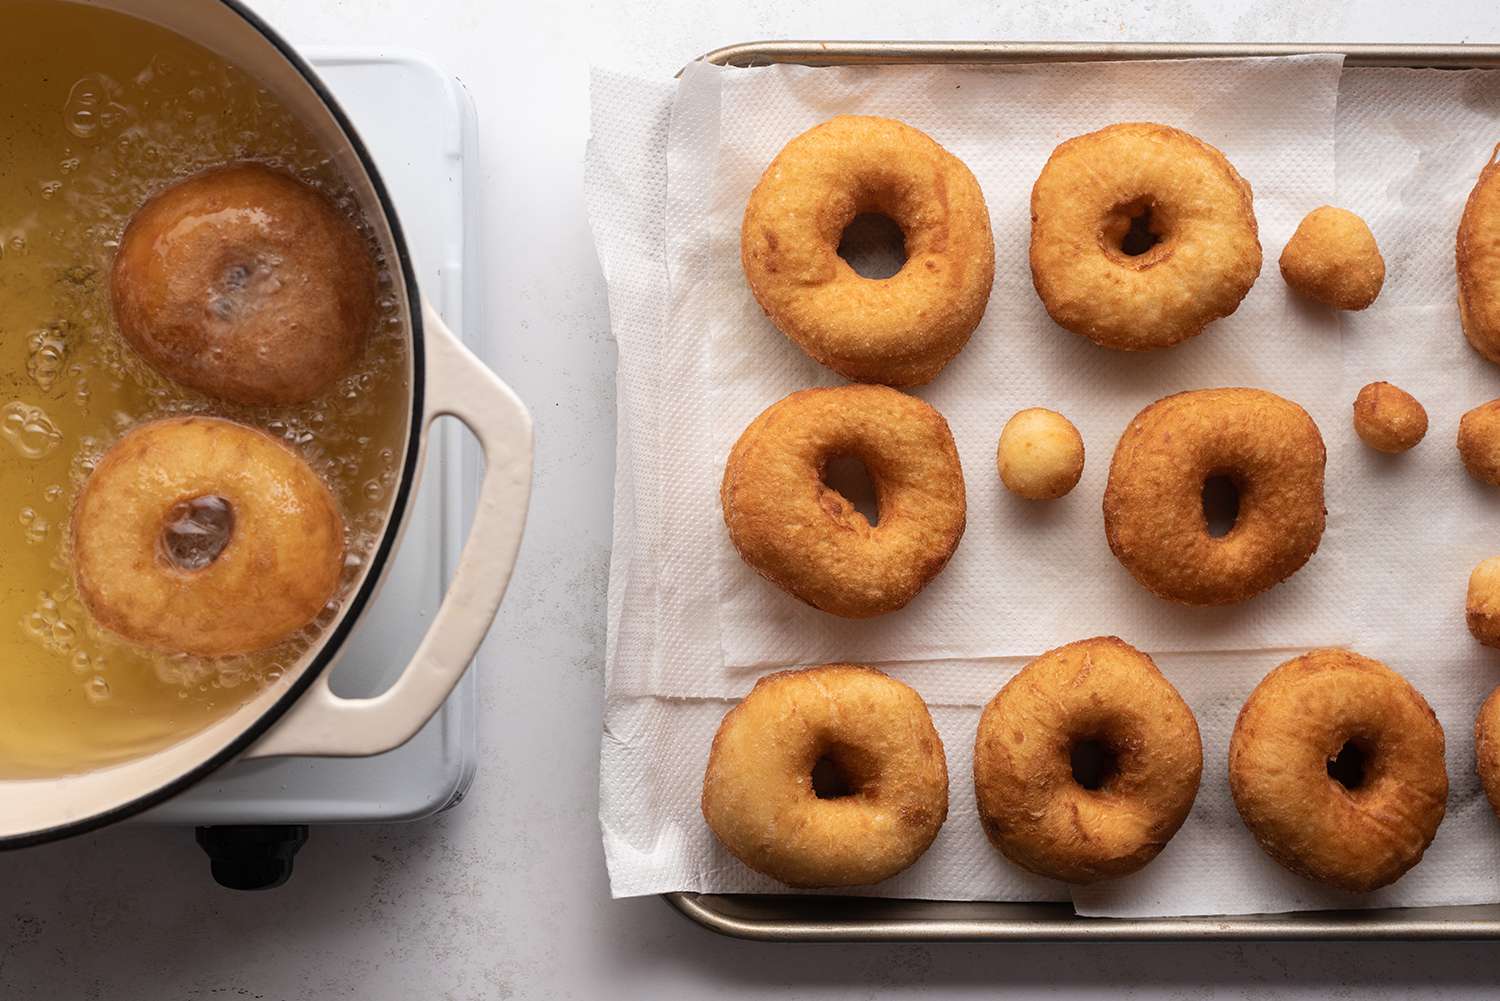 Doughnuts frying in a pot with oil, and doughnuts on a lined baking sheet 